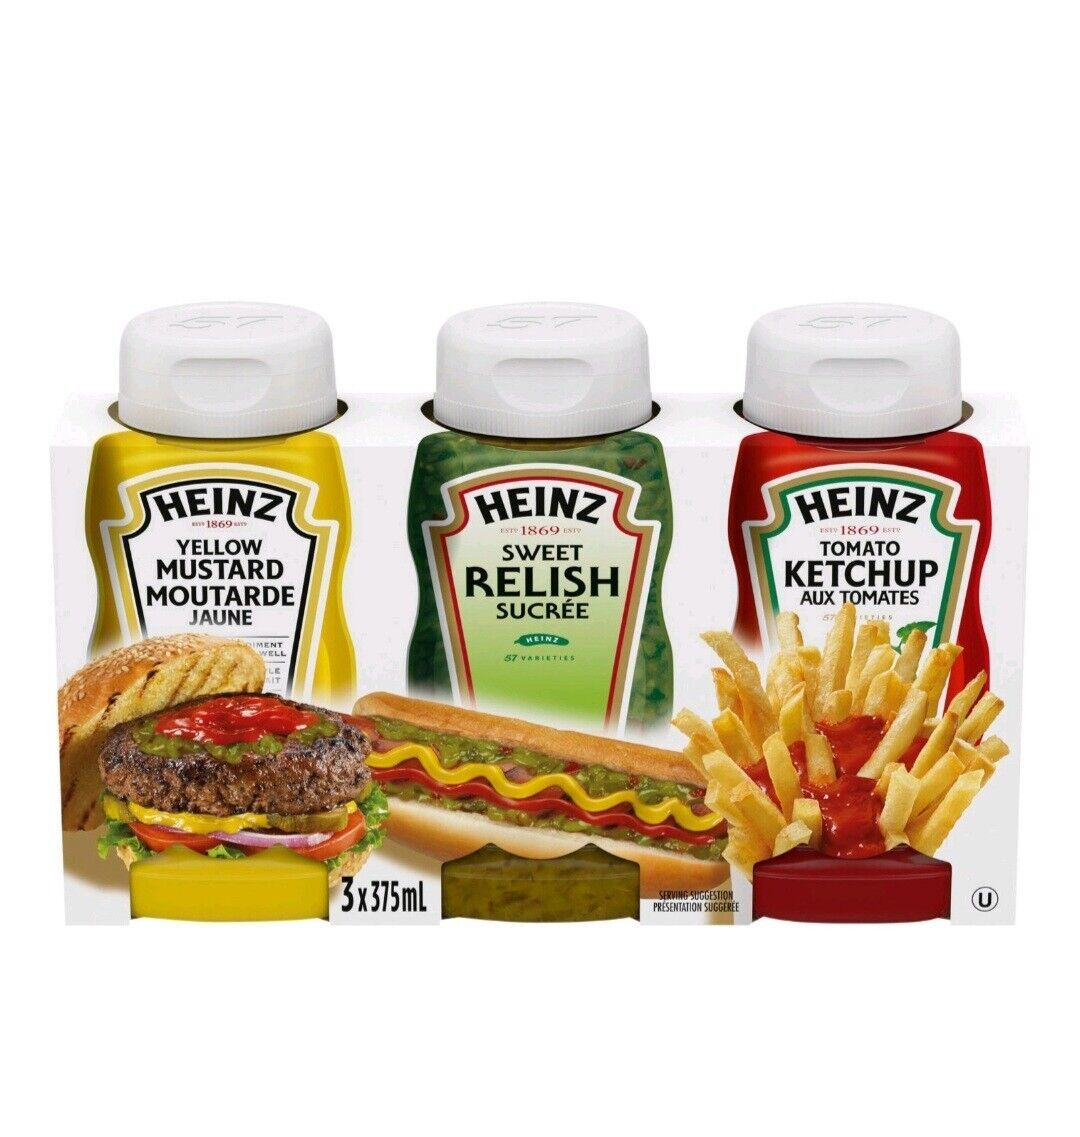 Heinz Mix Pack KETCHUP / RELISH / MUSTARD condiments sauce 375ml each Canada - $28.06